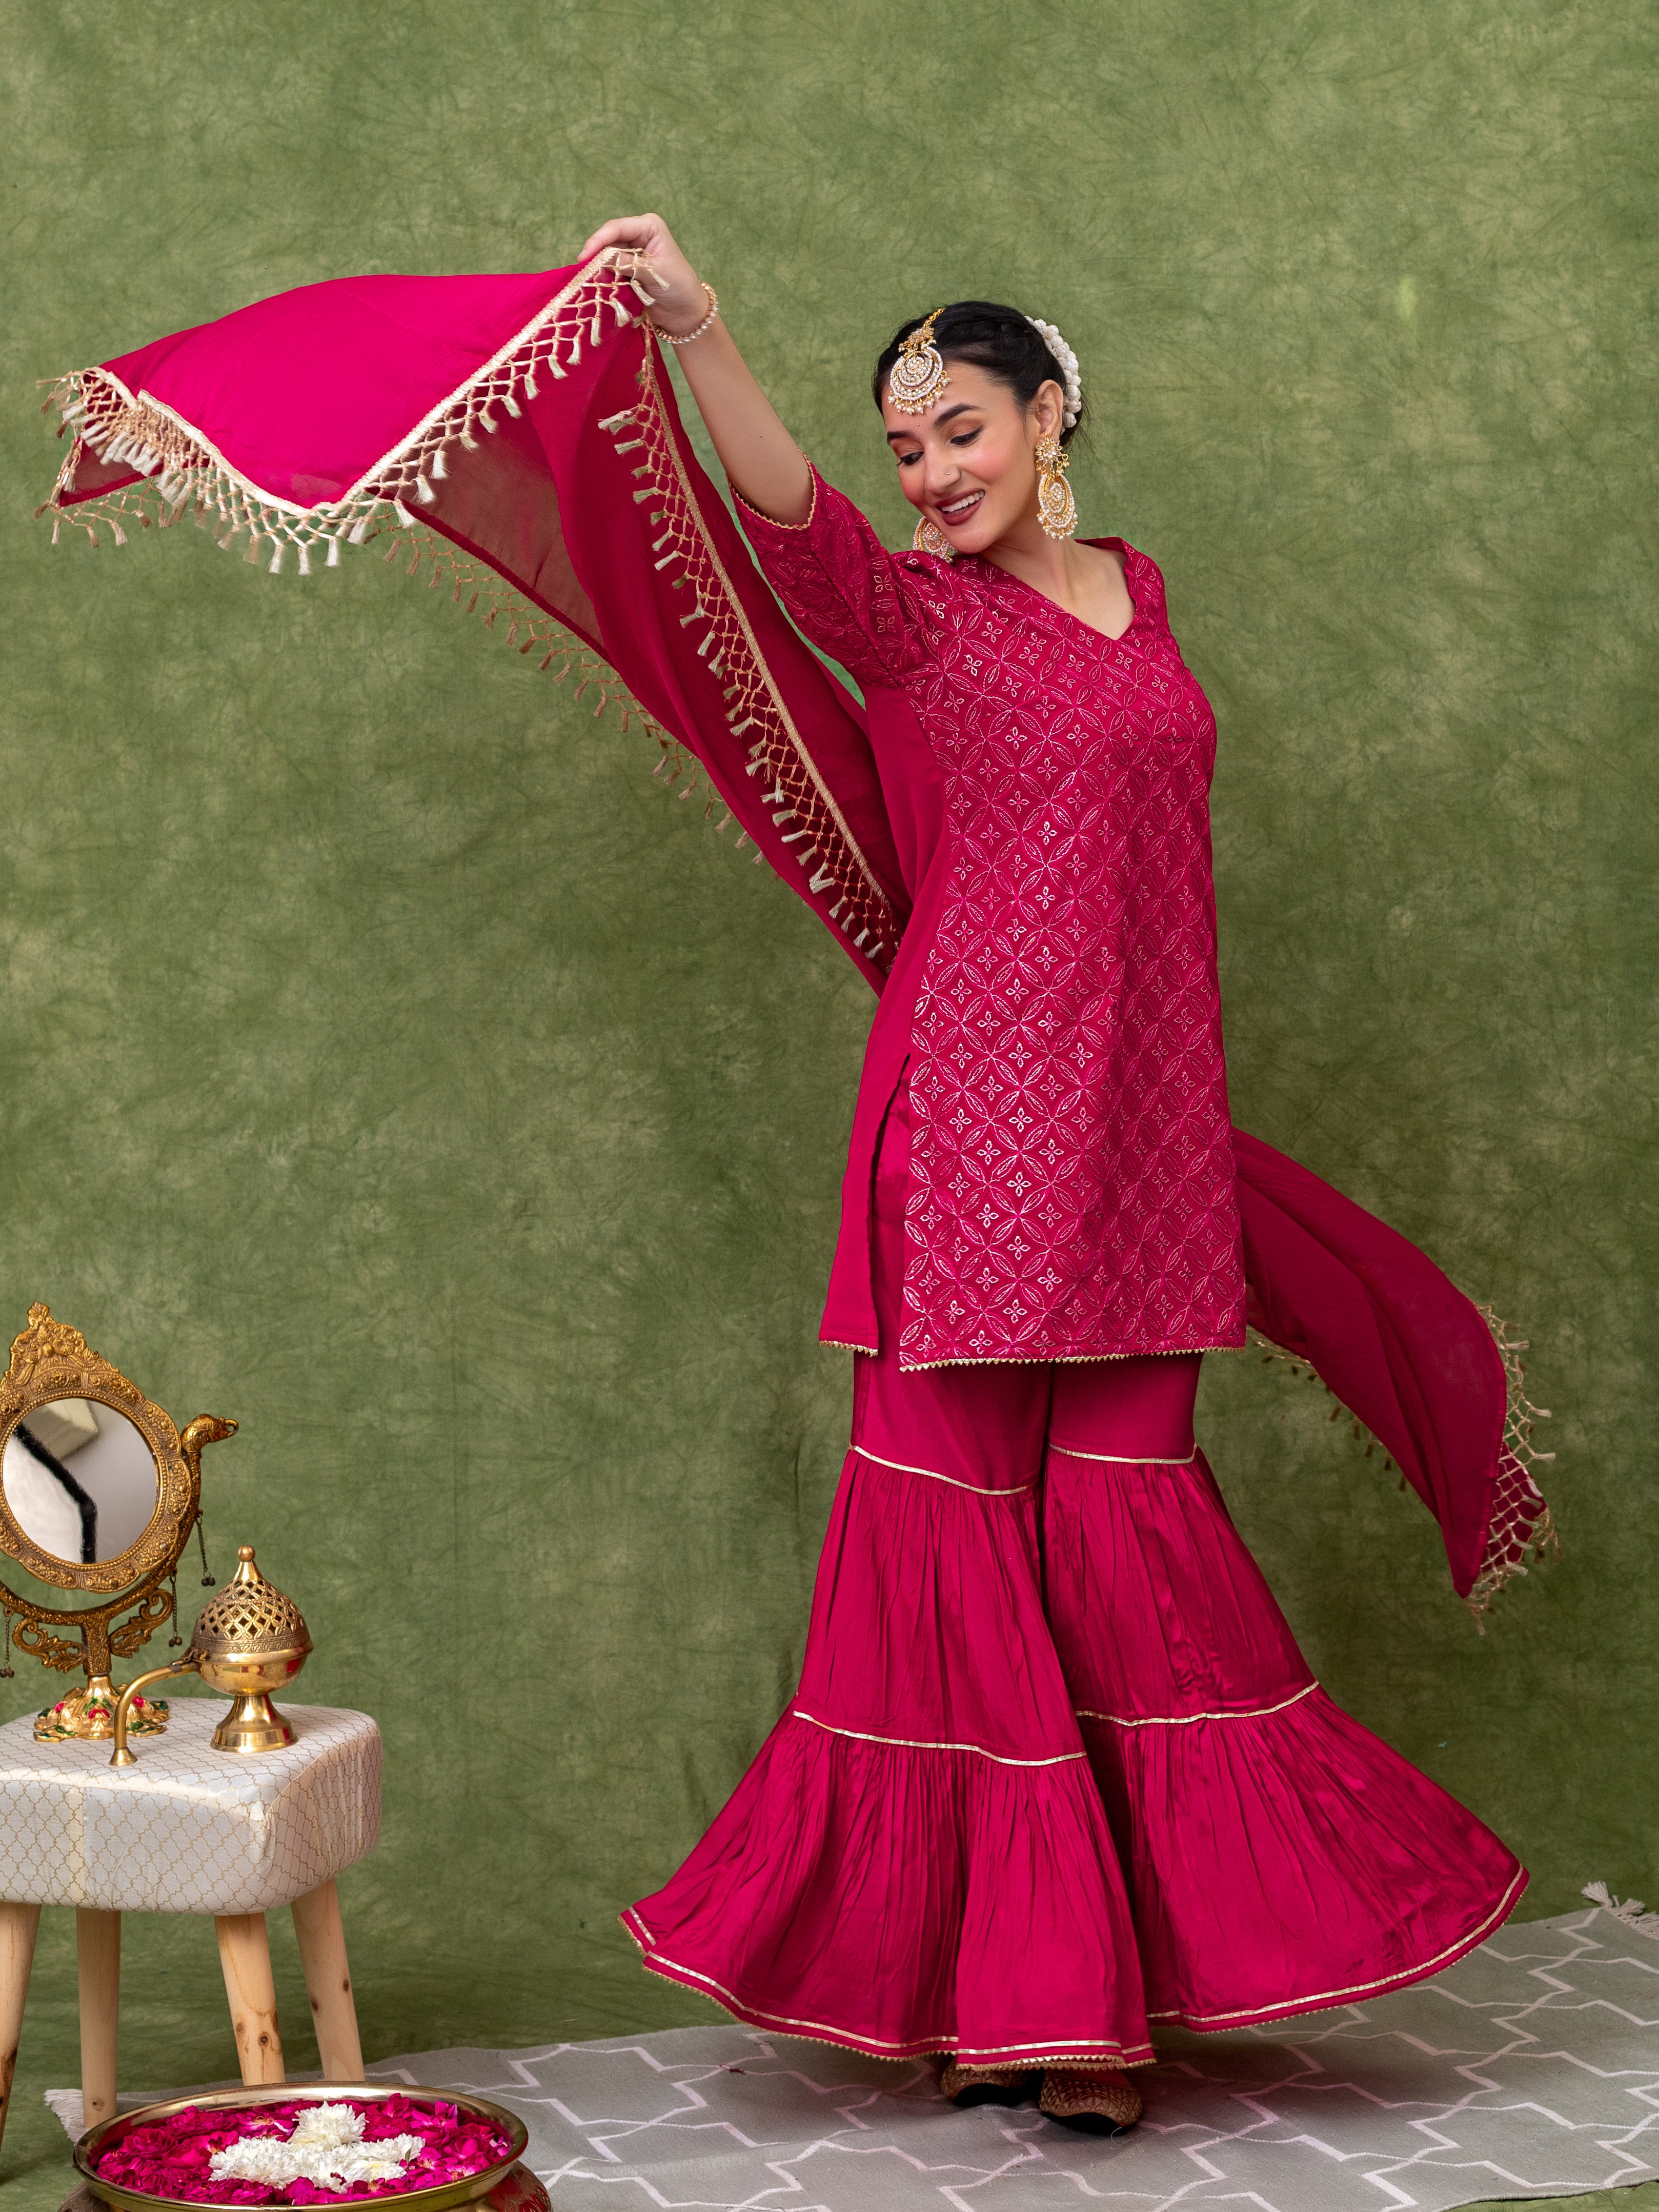 embrace-opulence-in-our-fully-embroidered-pink-straight-kurta-paired-with-a-tiered-sharara-and-dupatta-a-complete-set-of-three-for-a-regal-dazzling-look